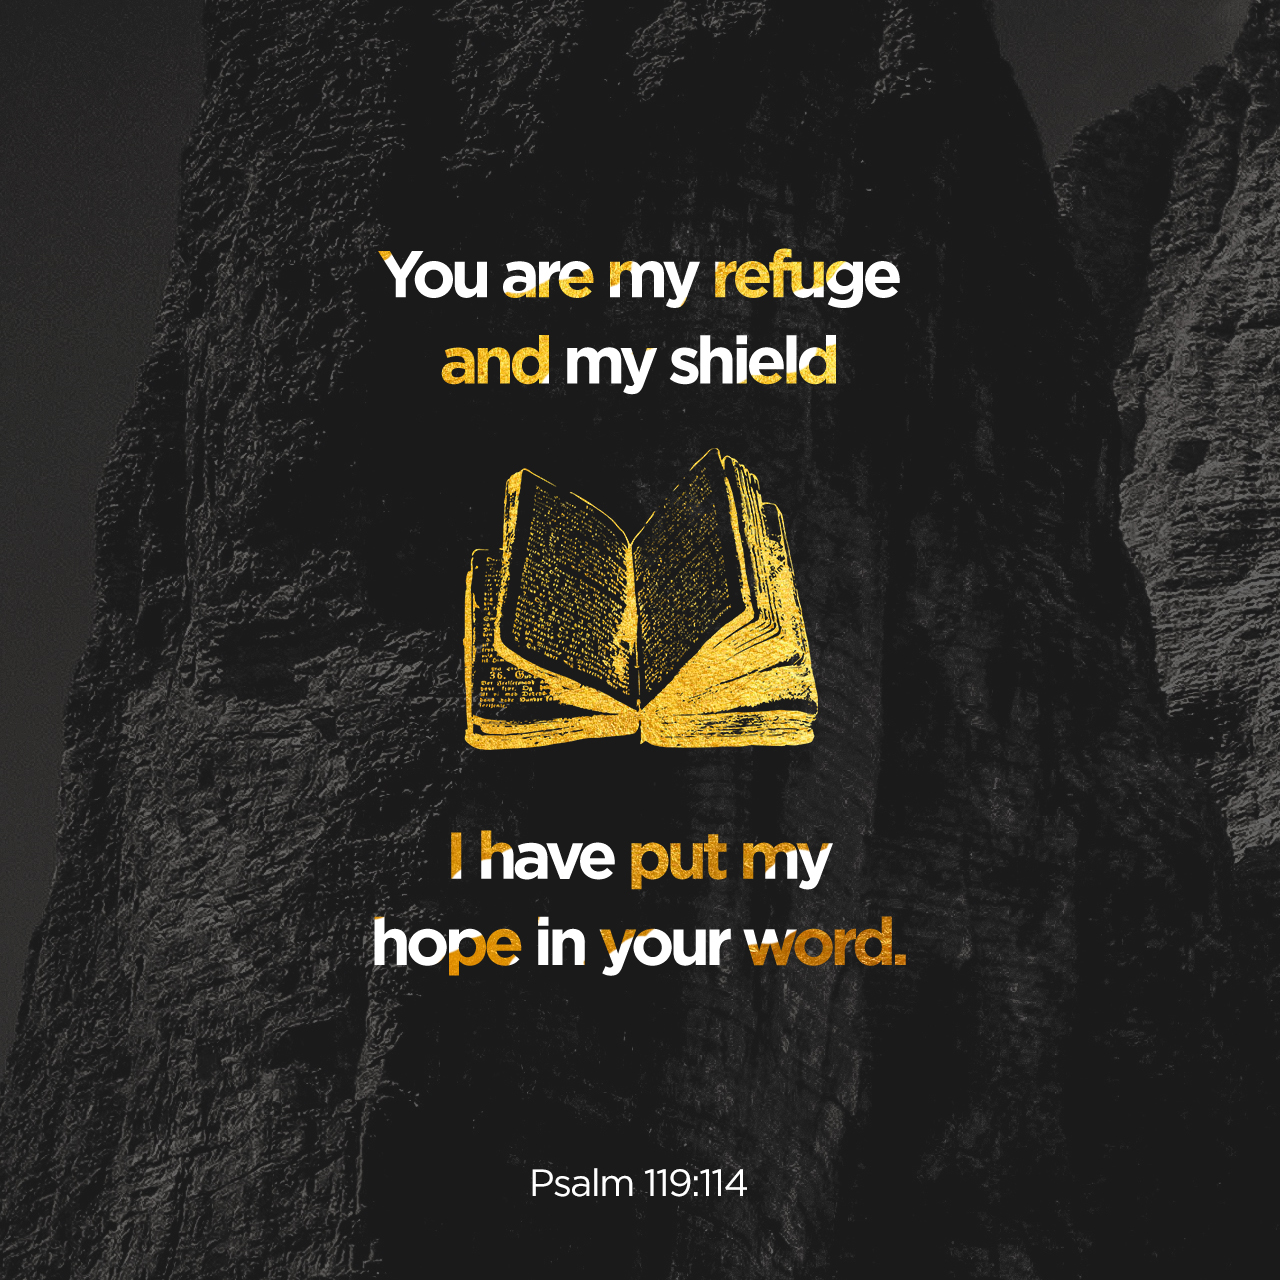 Psalms 119 verse 114 reads, "You are my refuge and my shield. I have put my hope in your word."